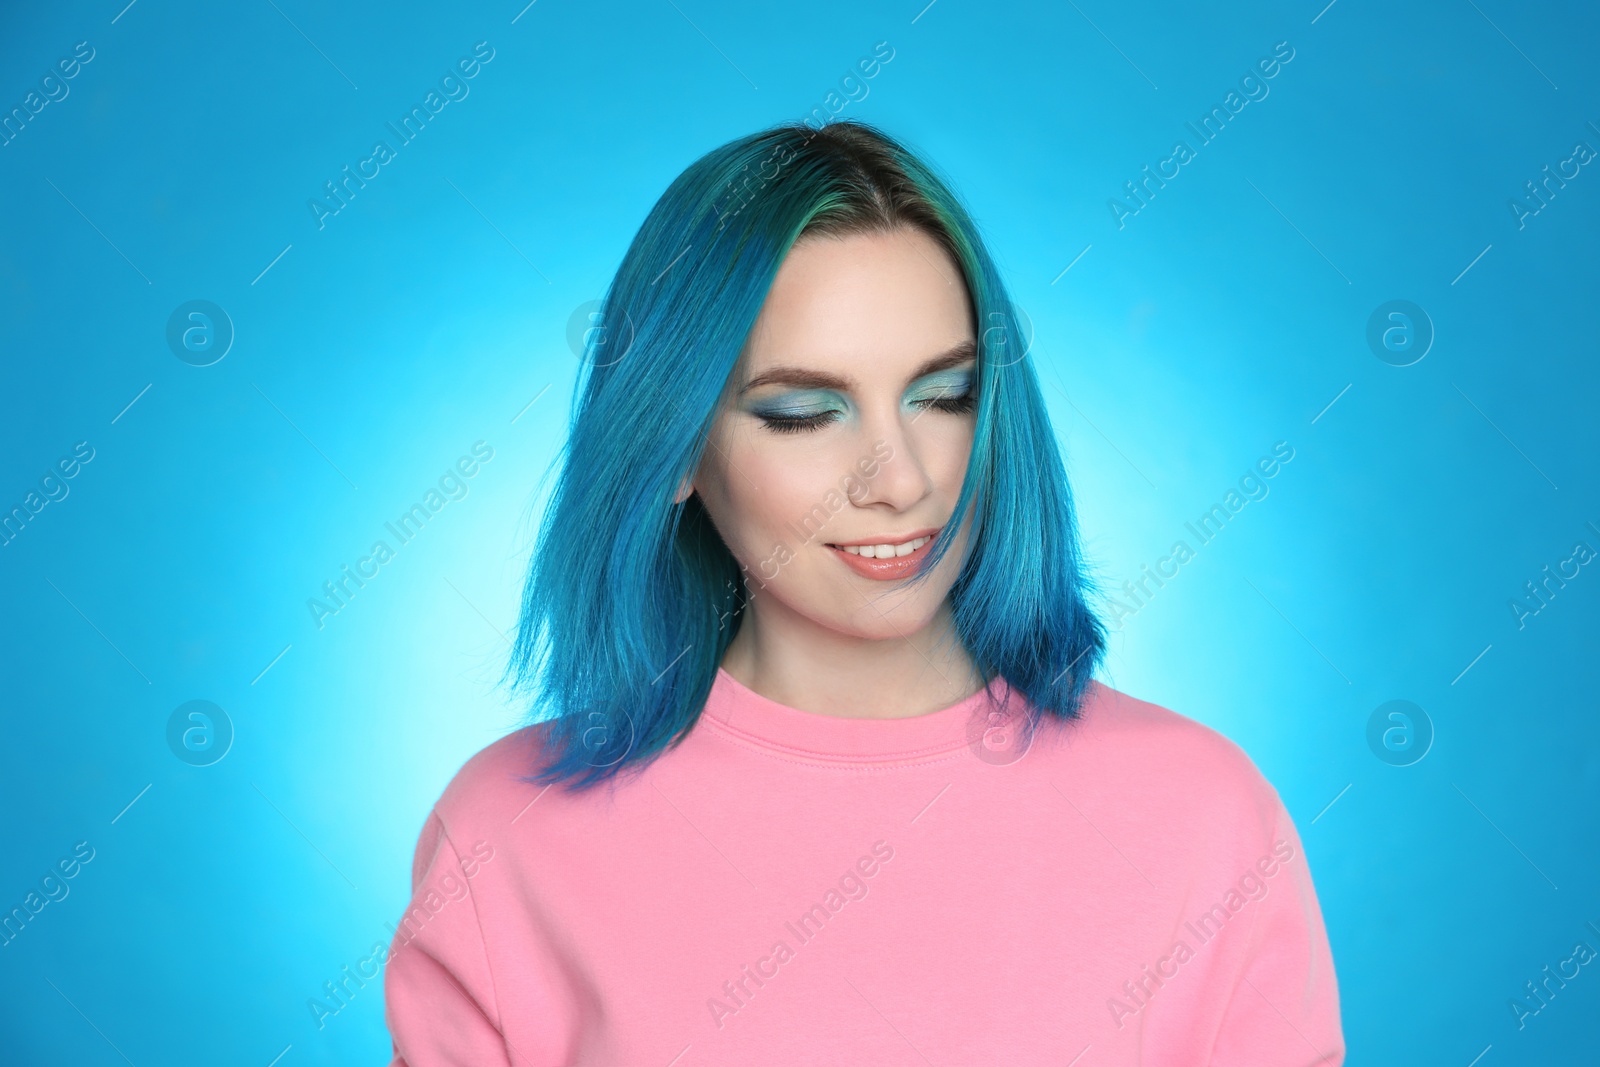 Photo of Young woman with bright dyed hair on light blue background